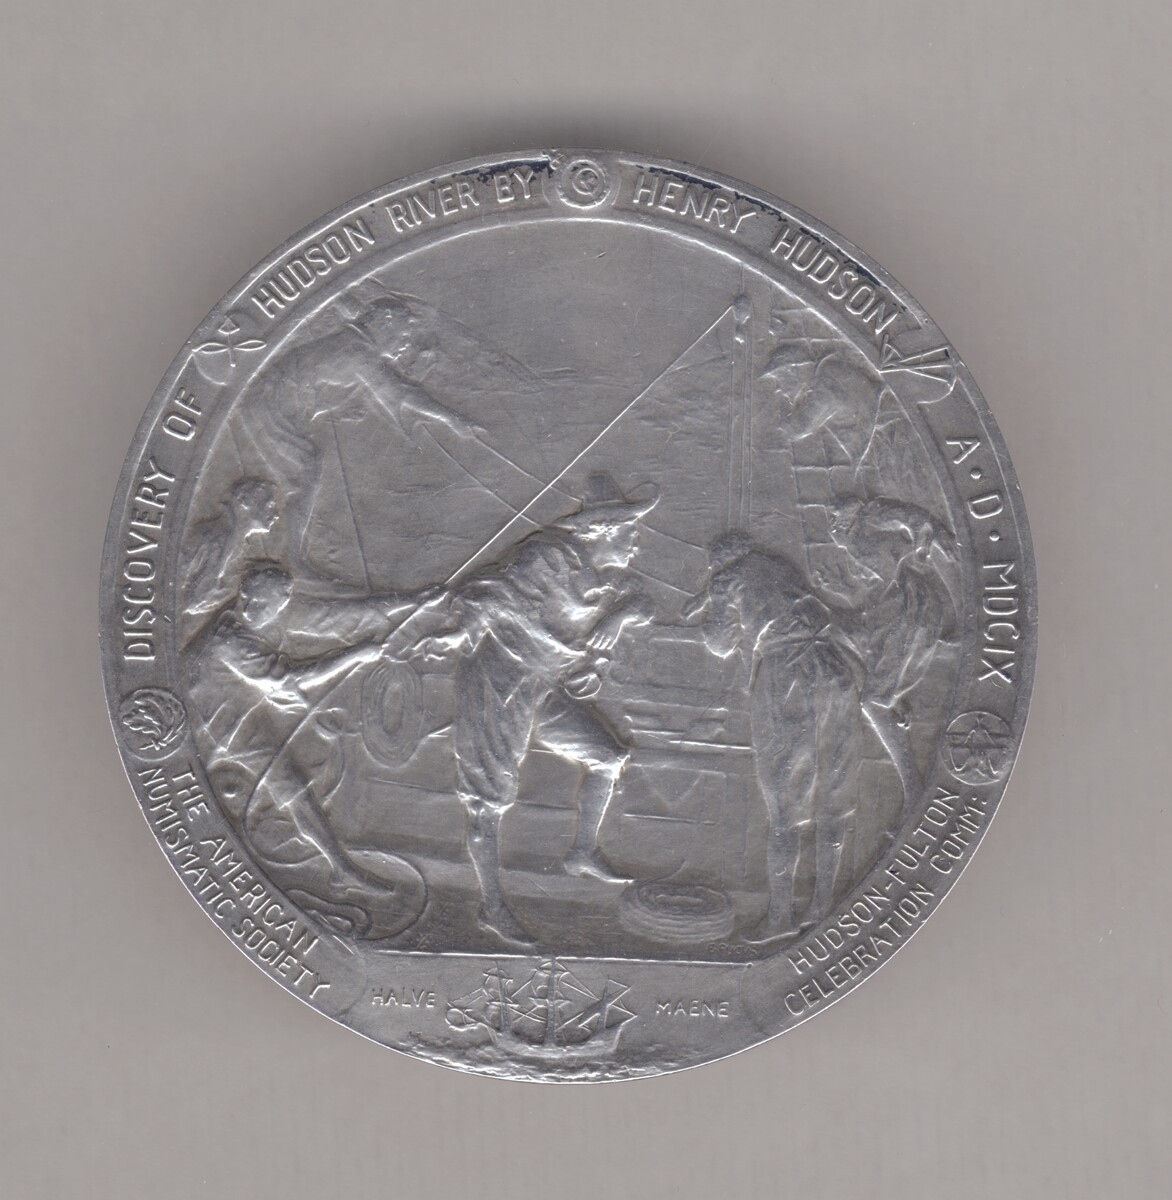 Medal struck to celebrate the three hundredth anniversary of the ‘discovery’ of the Mahicannittuk River by European colonisers (which they re-named the Hudson River after Henry Hudson), and the centenary of steam navigation of the river